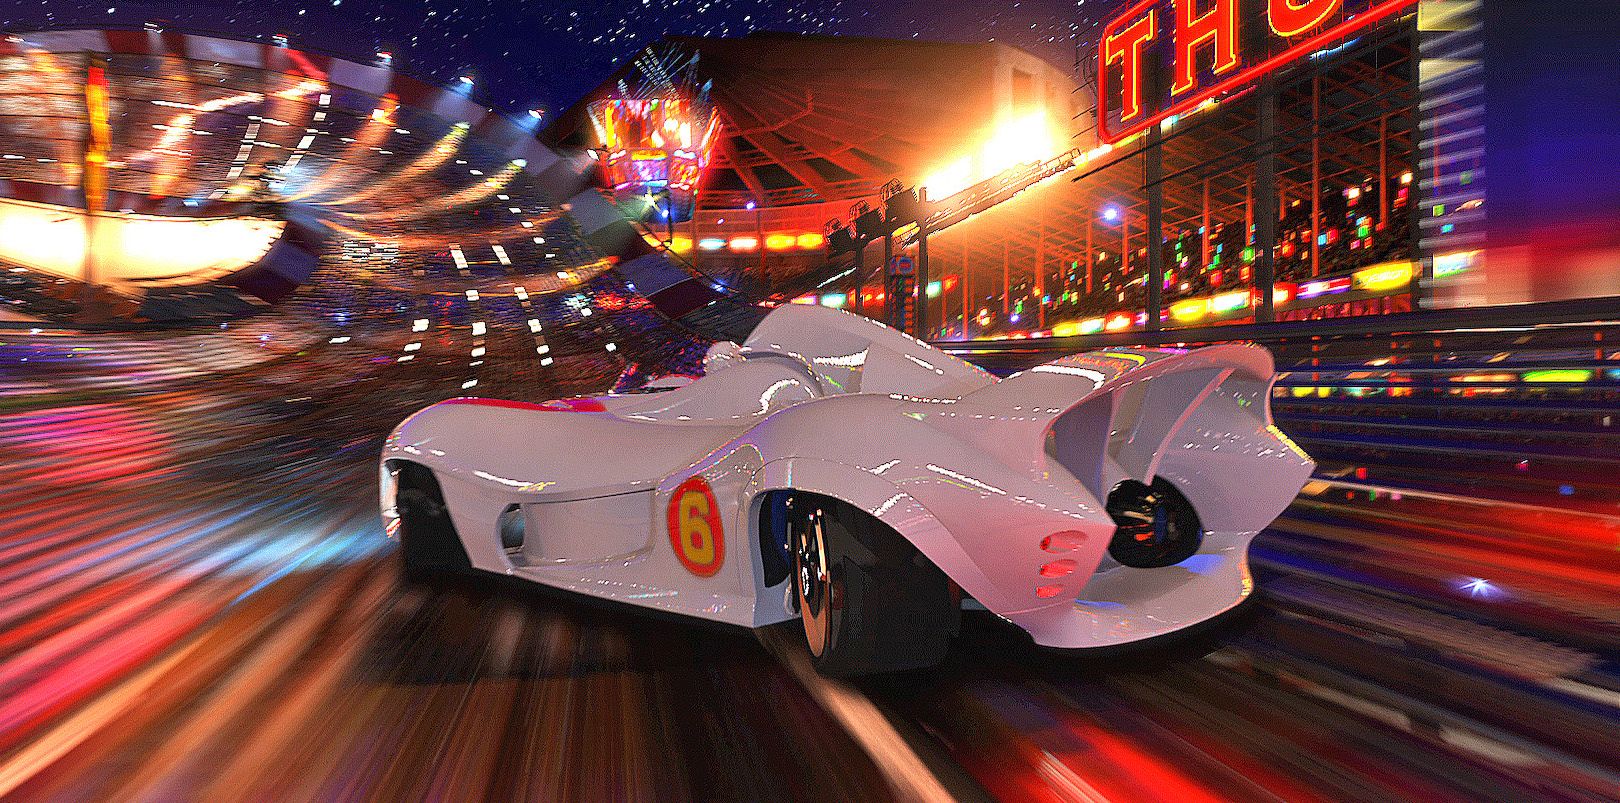 The Mach-5 speeding through the streets in the Speed Racer movie